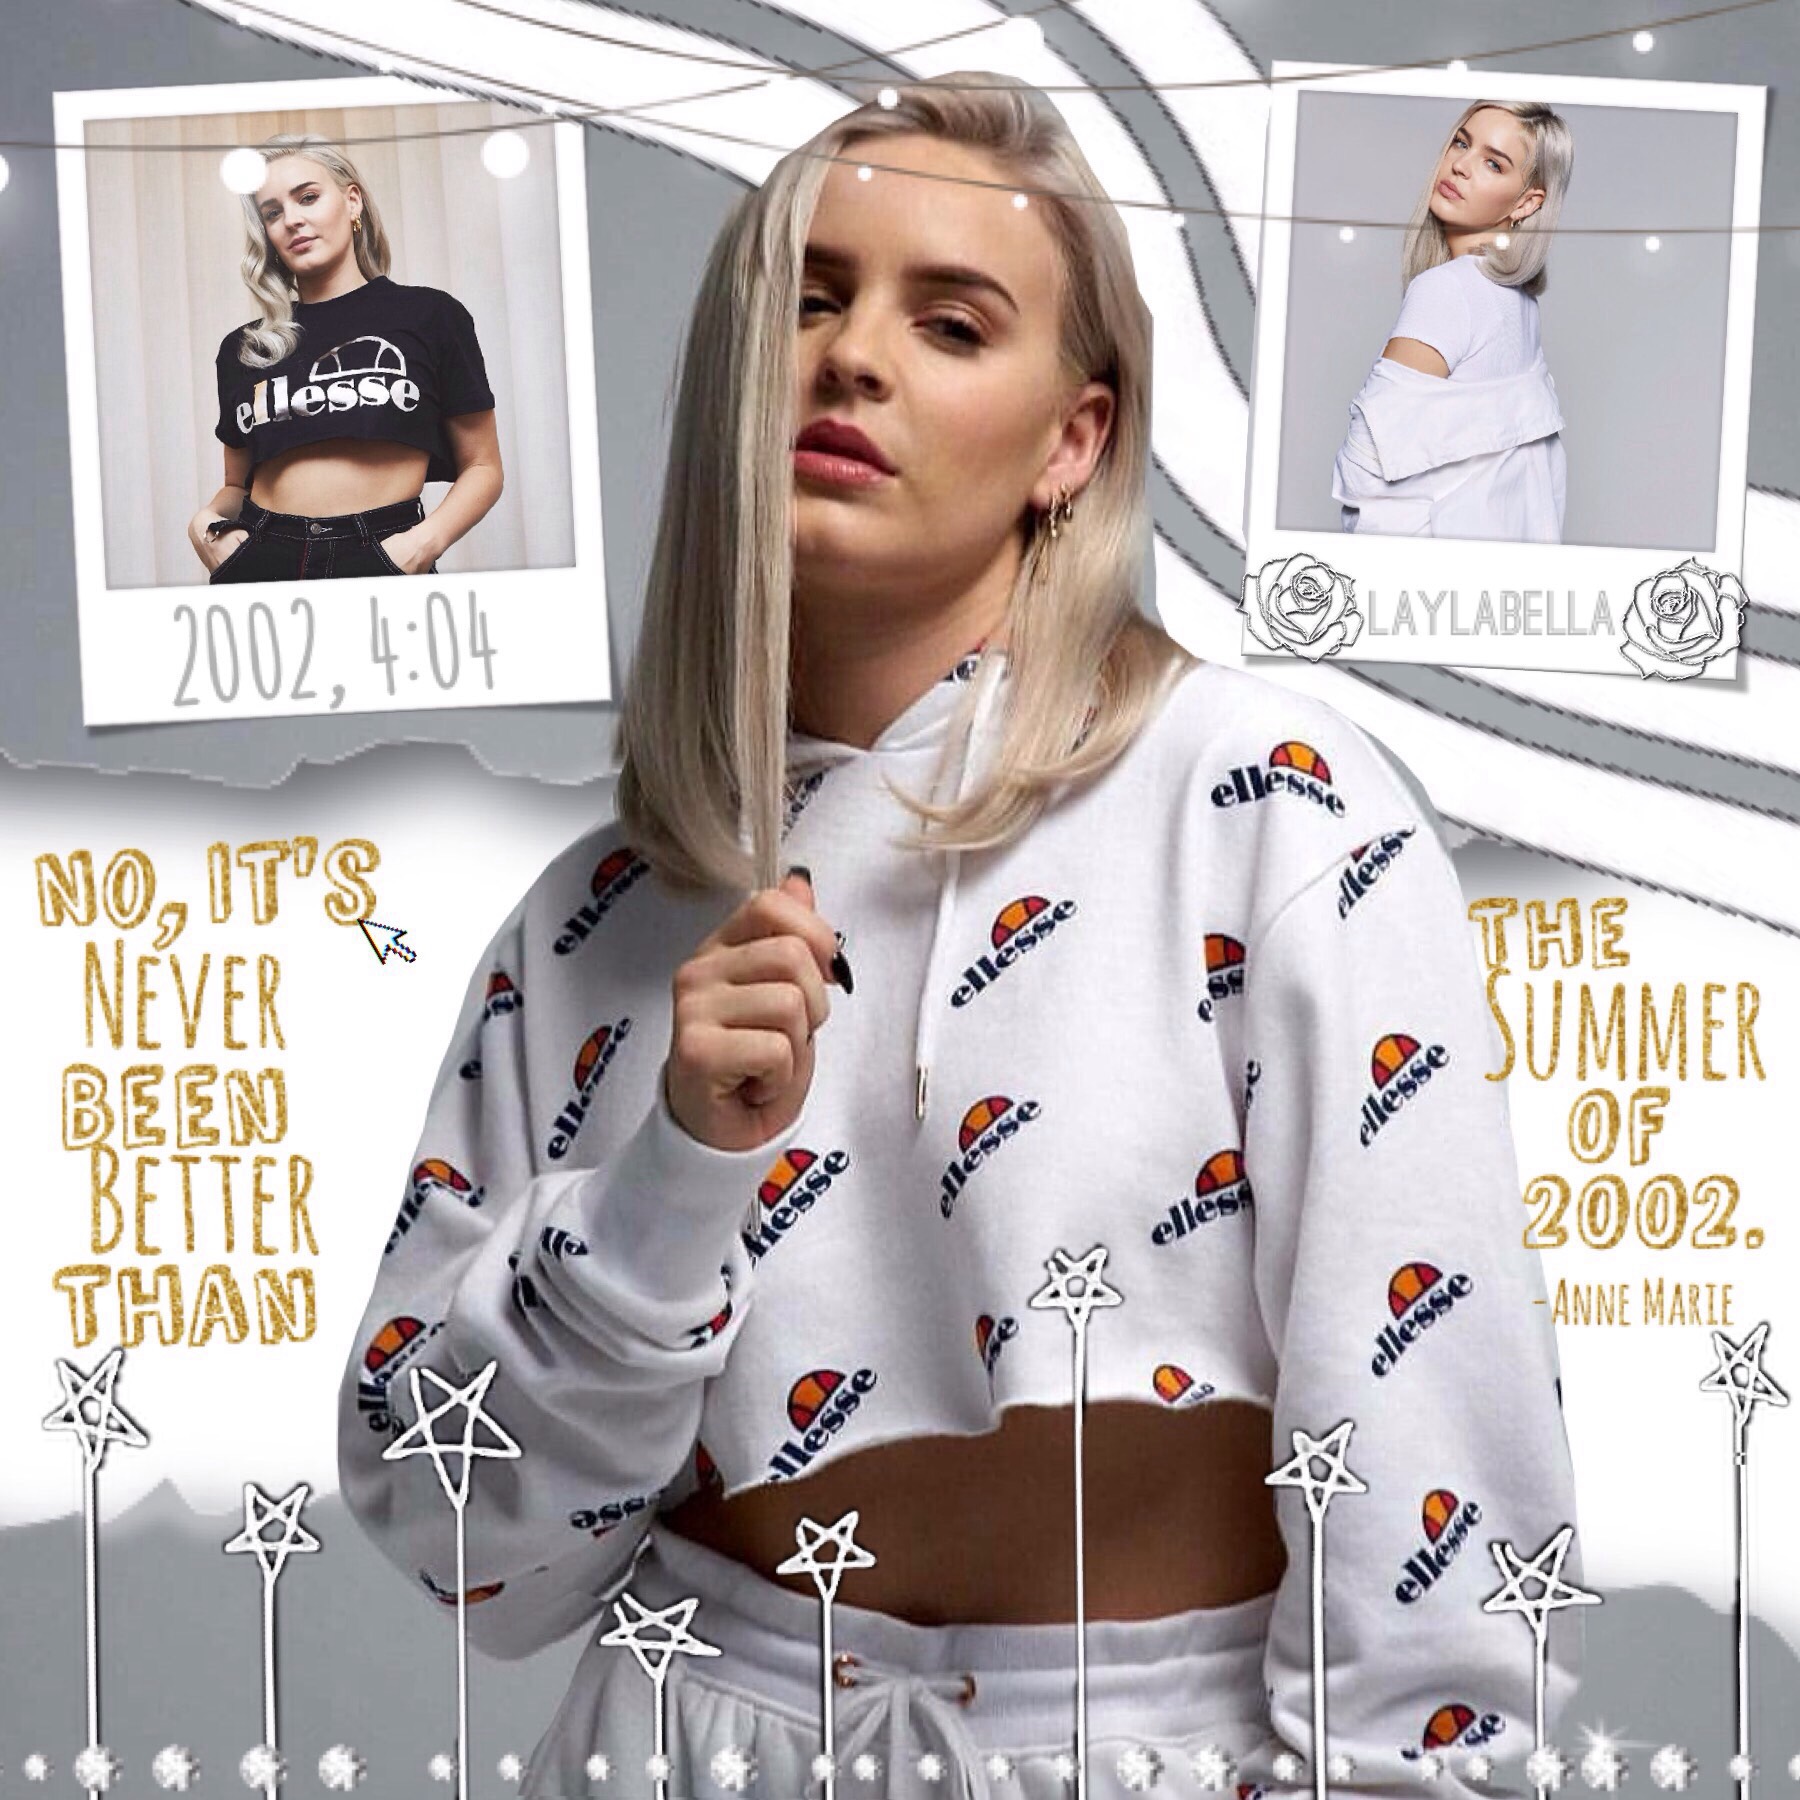 What are your favorite songs from Anne-Marie